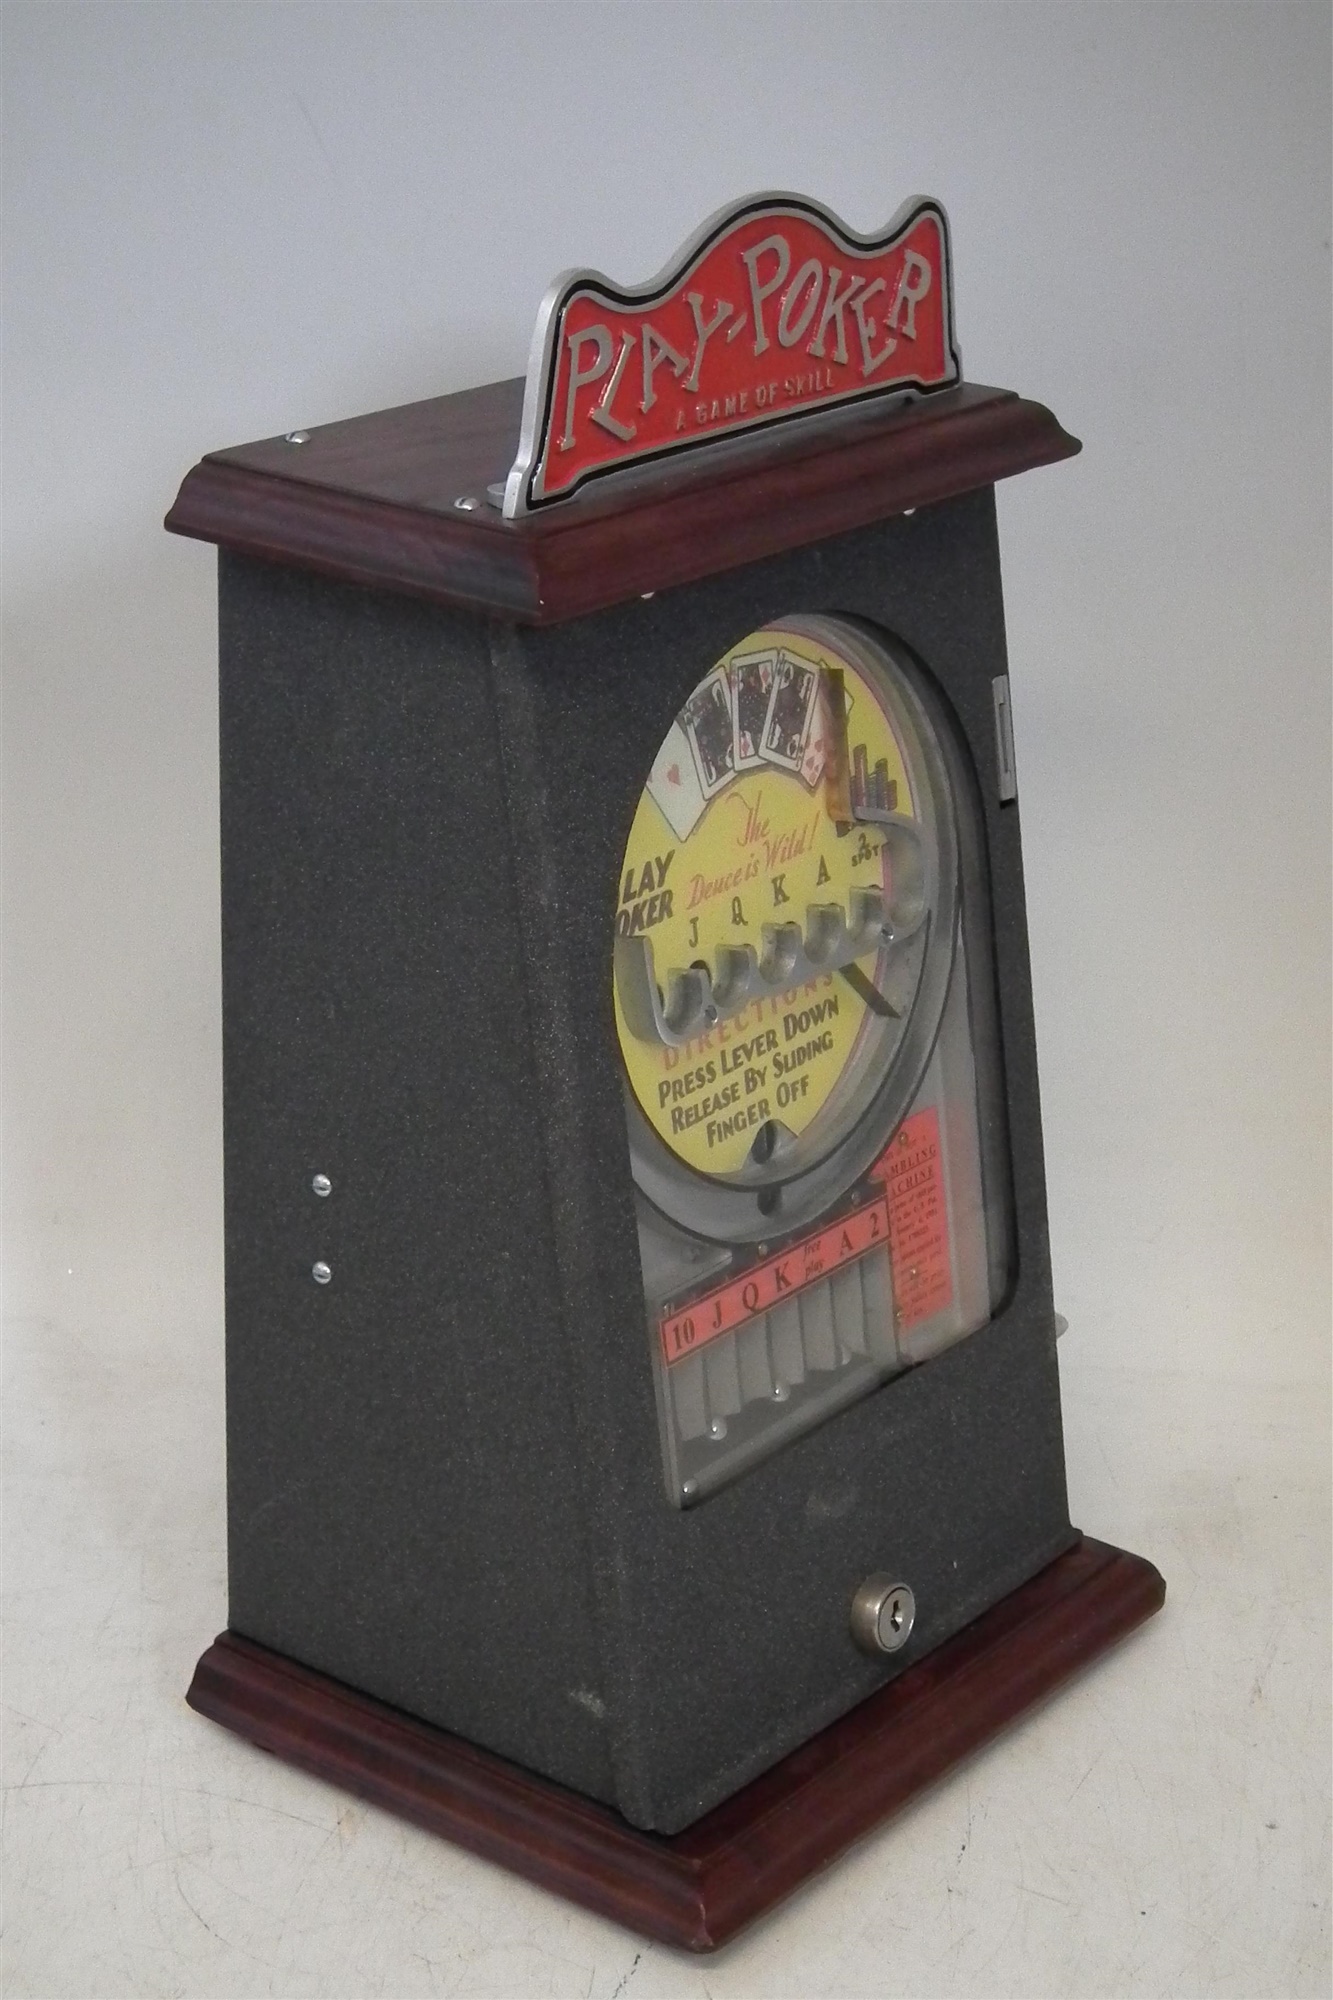 Play Poker 'Game of Skill' reproduction counter top slot machine , working off 1 cent coins, with - Image 2 of 5